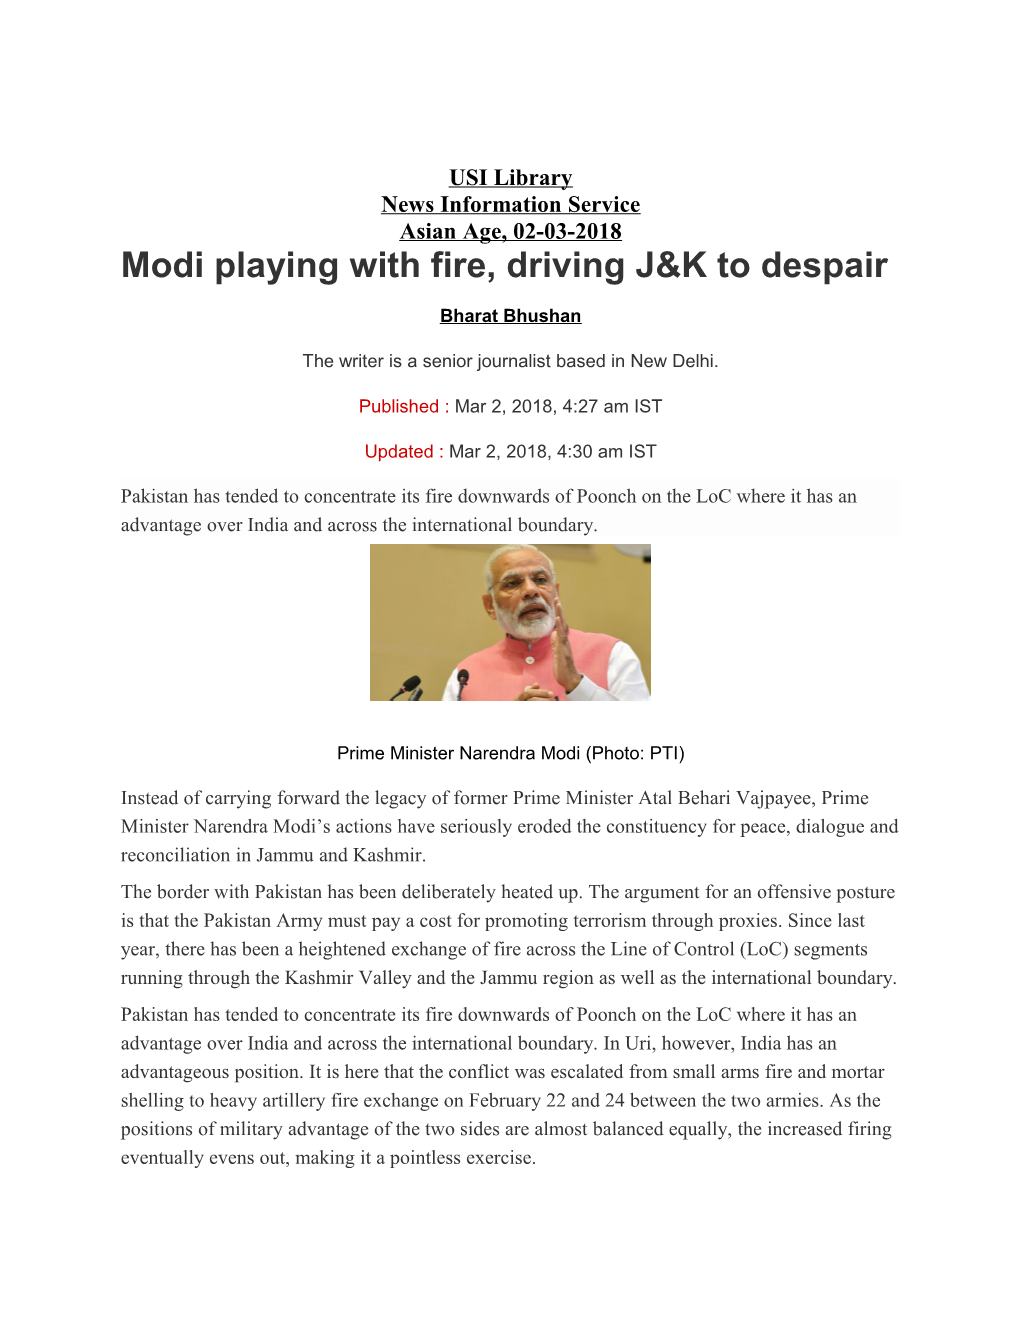 Modi Playing with Fire, Driving J&K to Despair